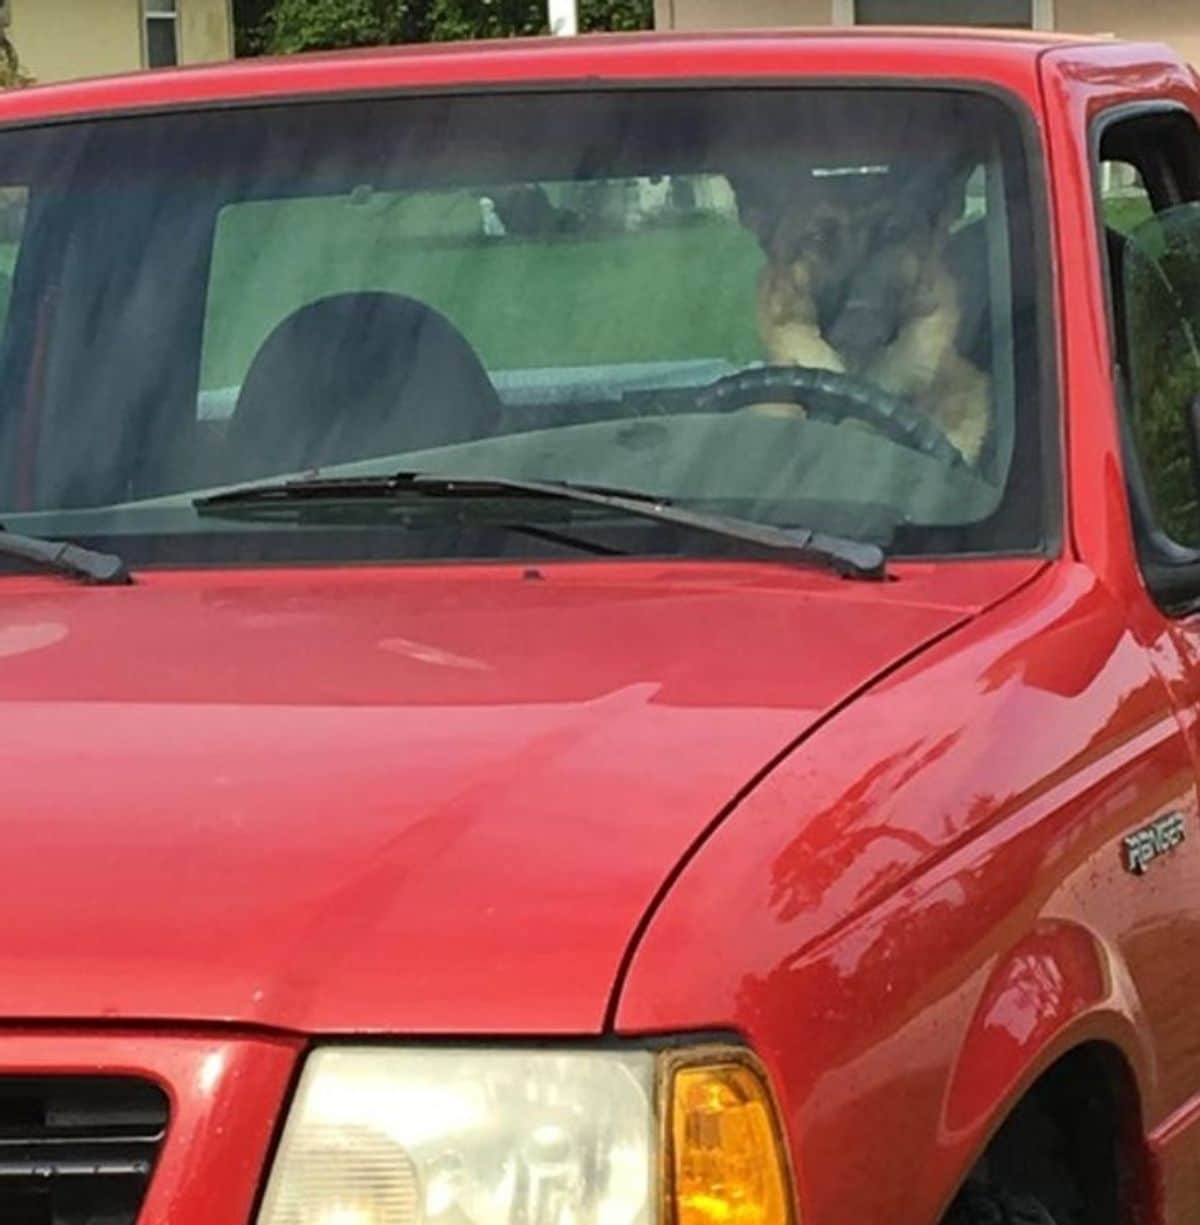 german shepherd sitting in the driving seat of a red pickup